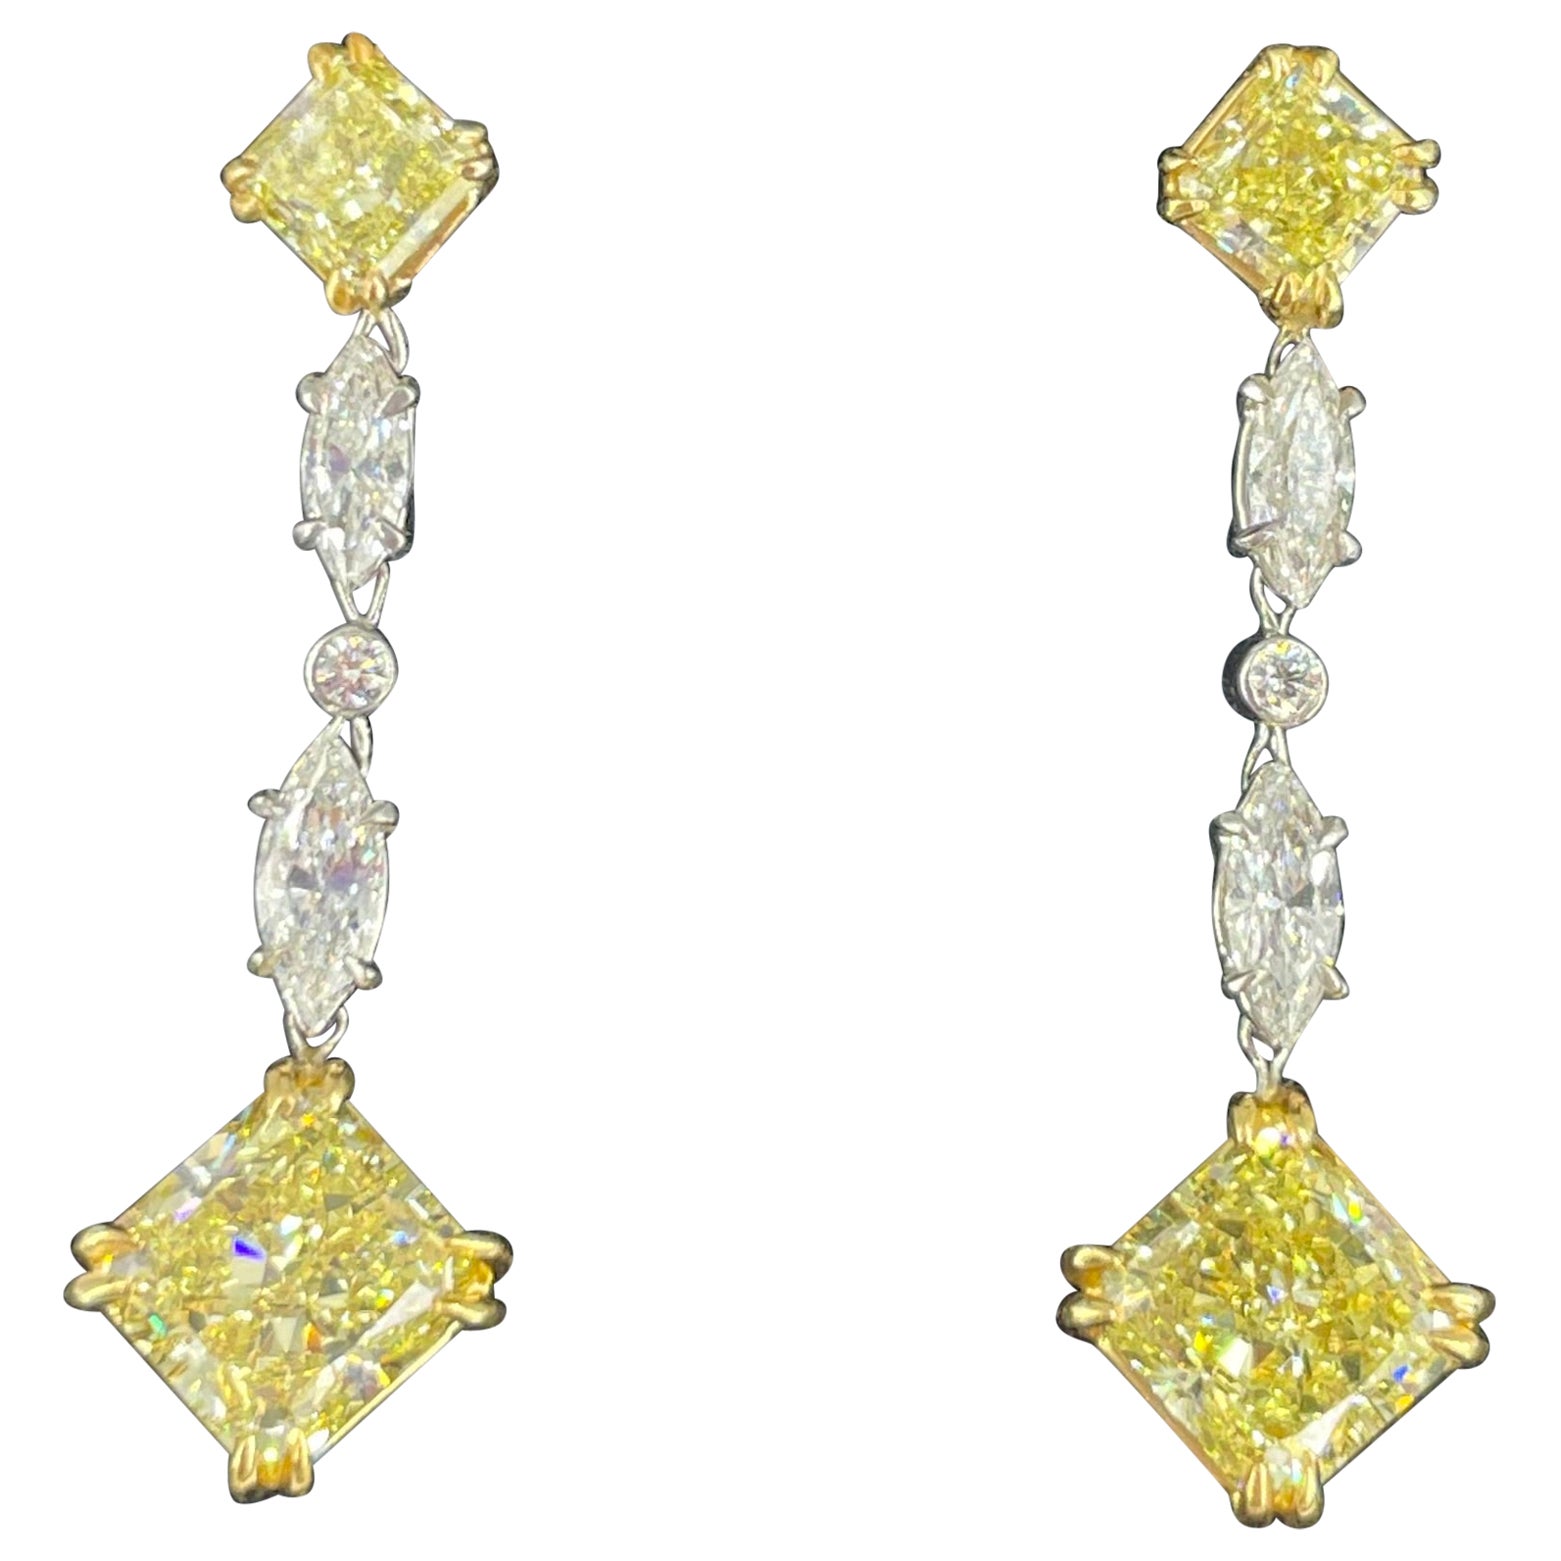 J. Birnbach 5.53 carat White and Yellow Diamond Drop Earrings For Sale